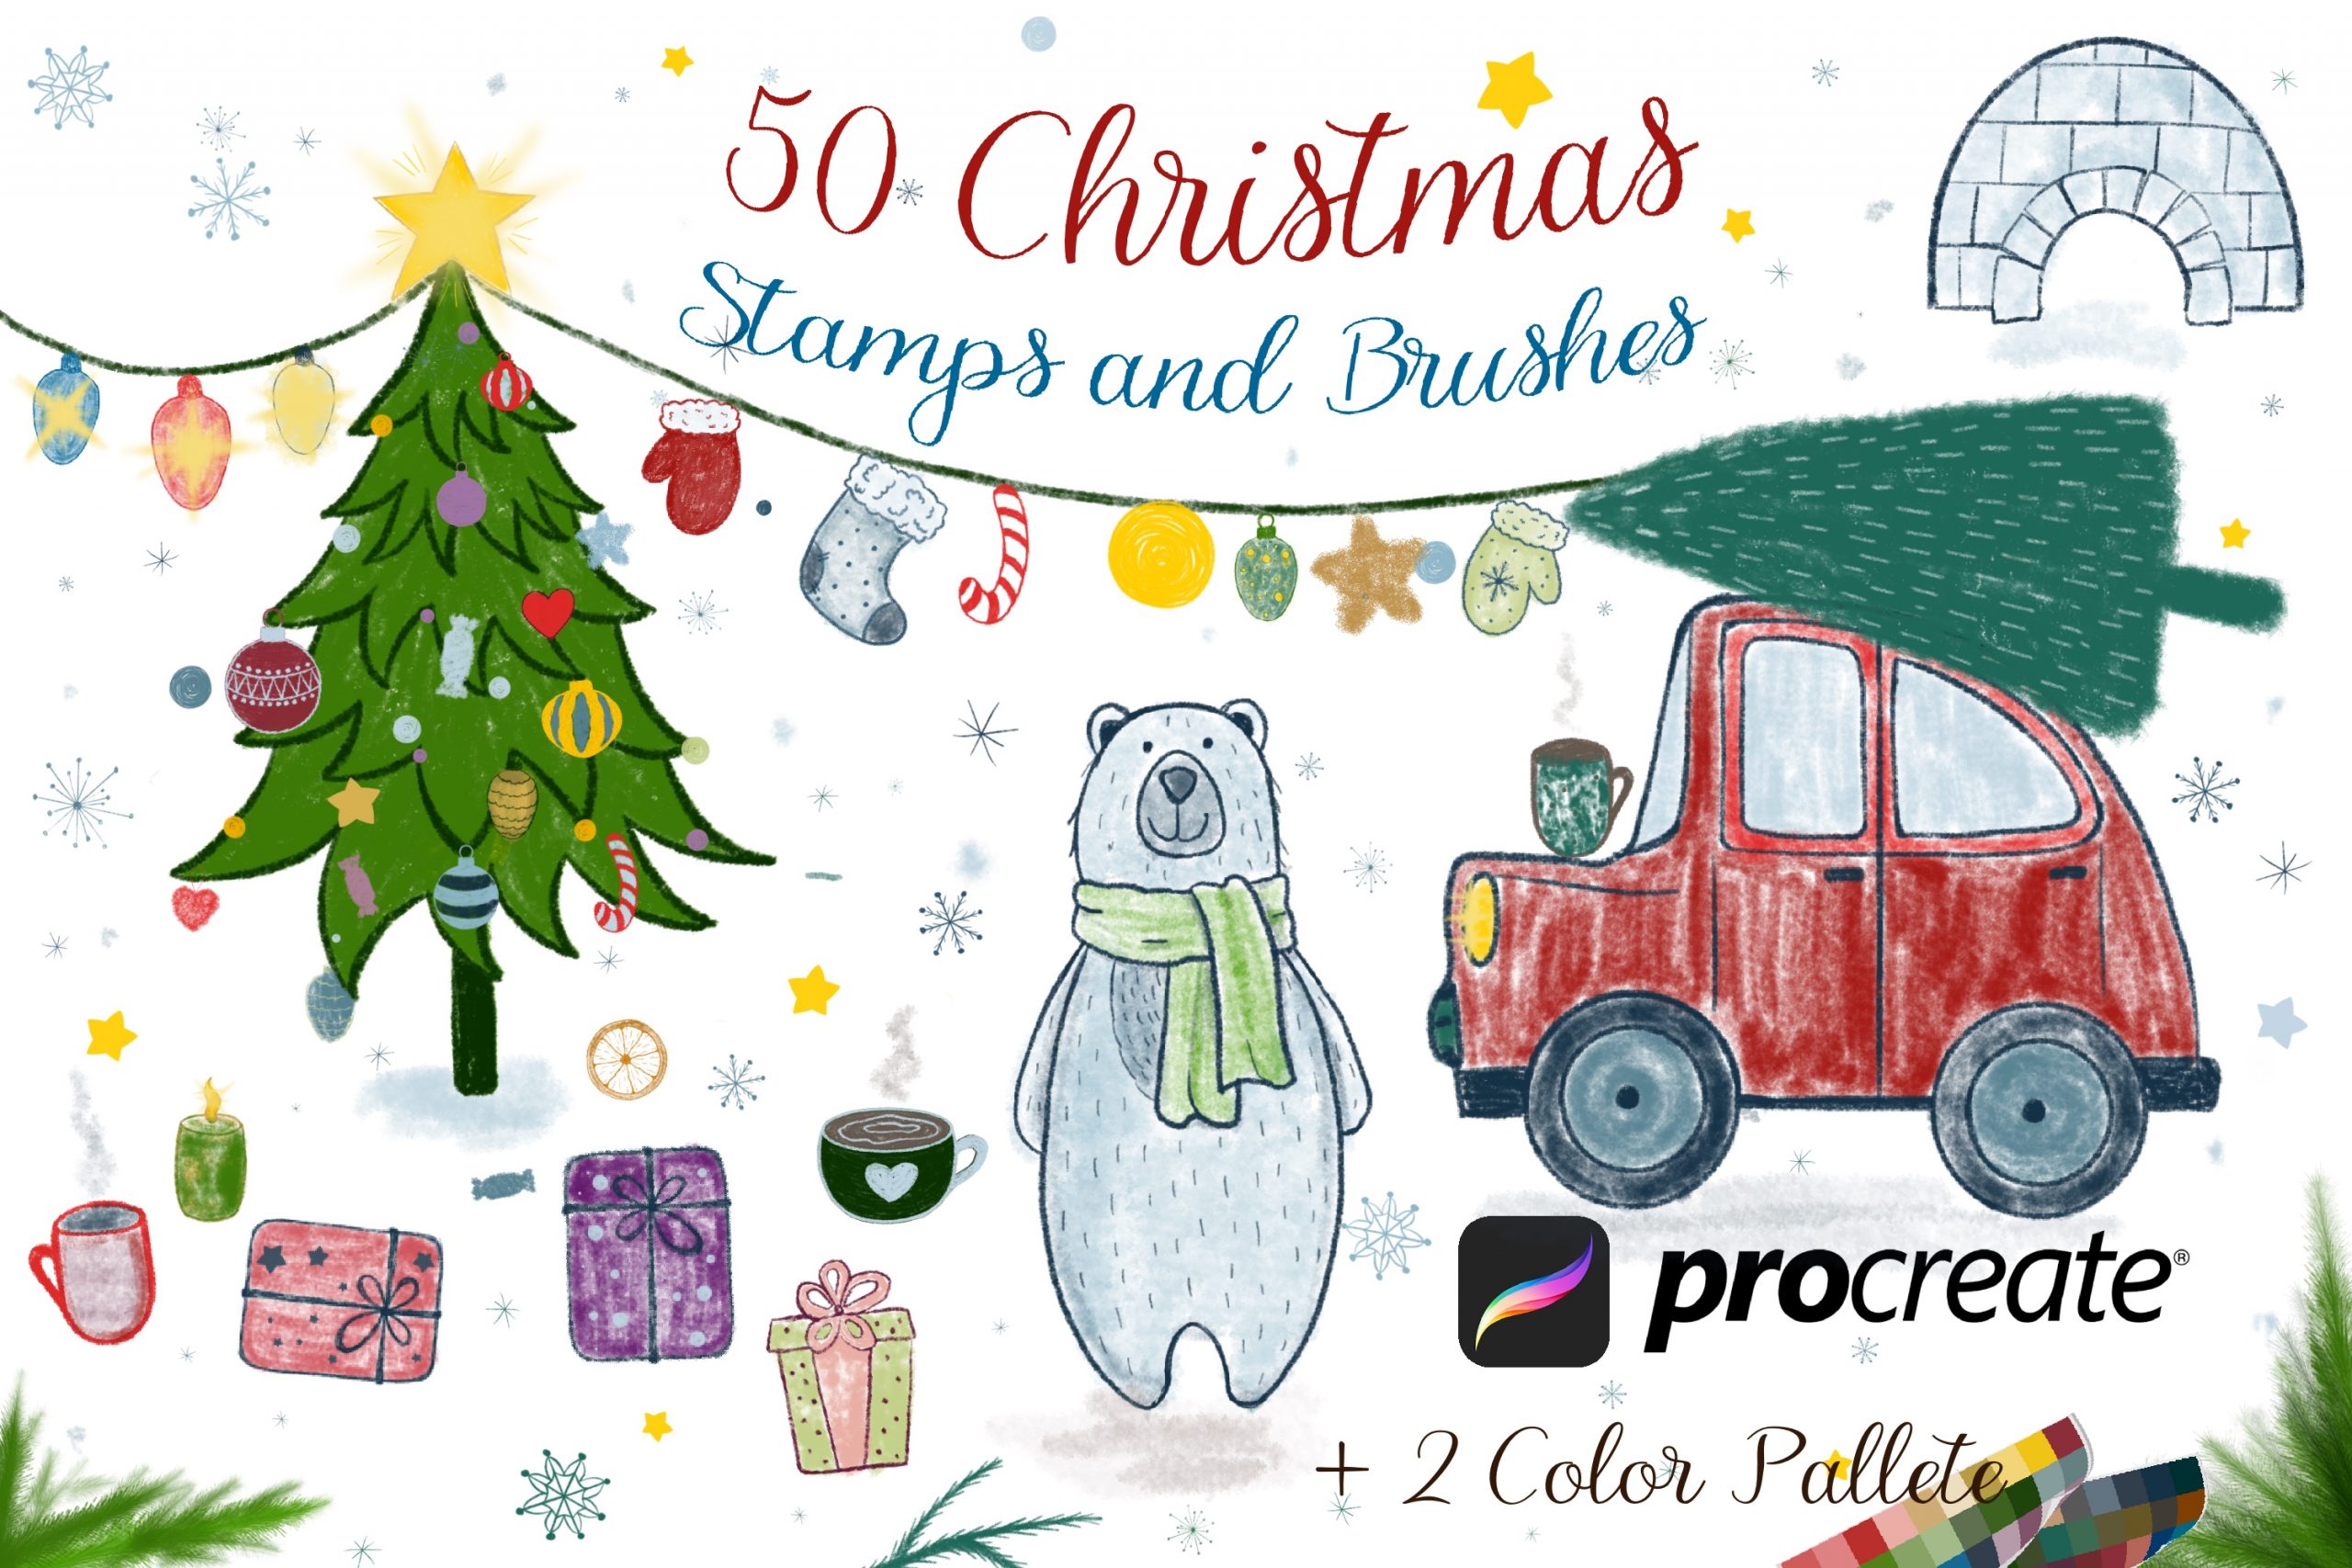 50 Christmas Stamps and Brushes Procreate.